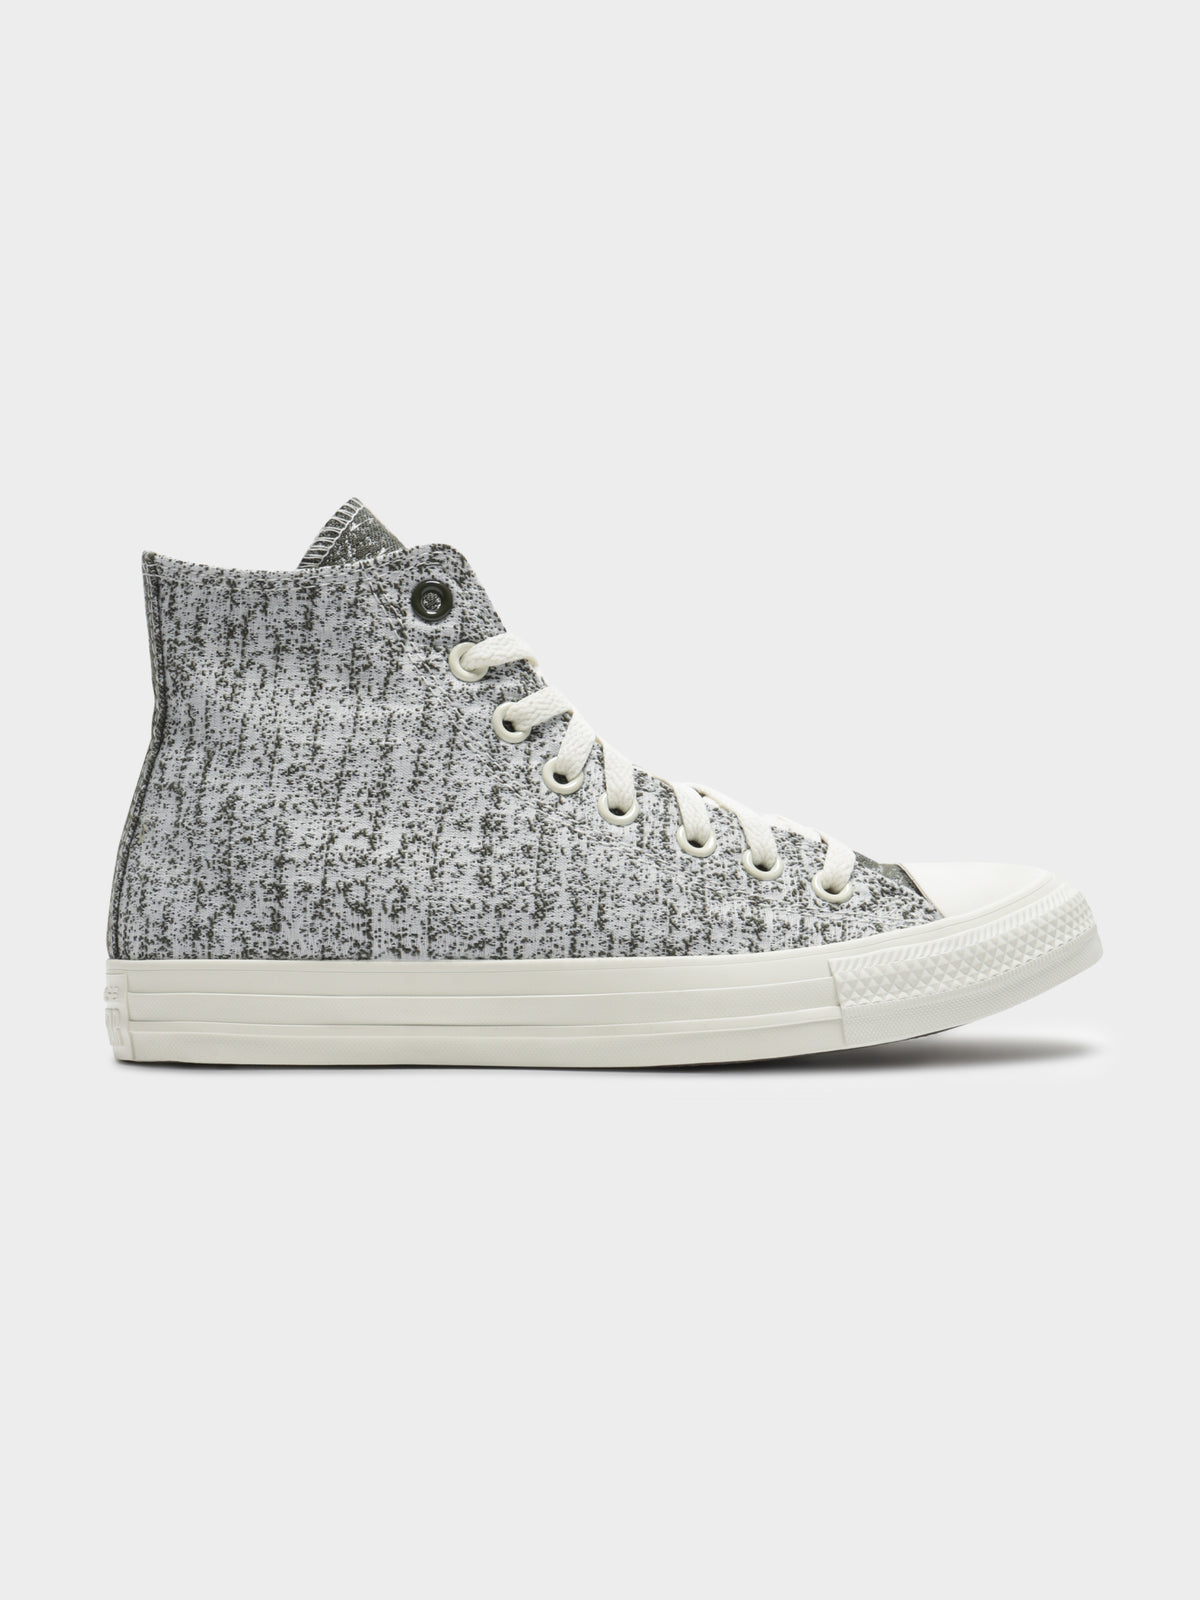 Unisex Chuck Taylor All Star Recycled Poly Jacquard Sneakers in Black &amp; White